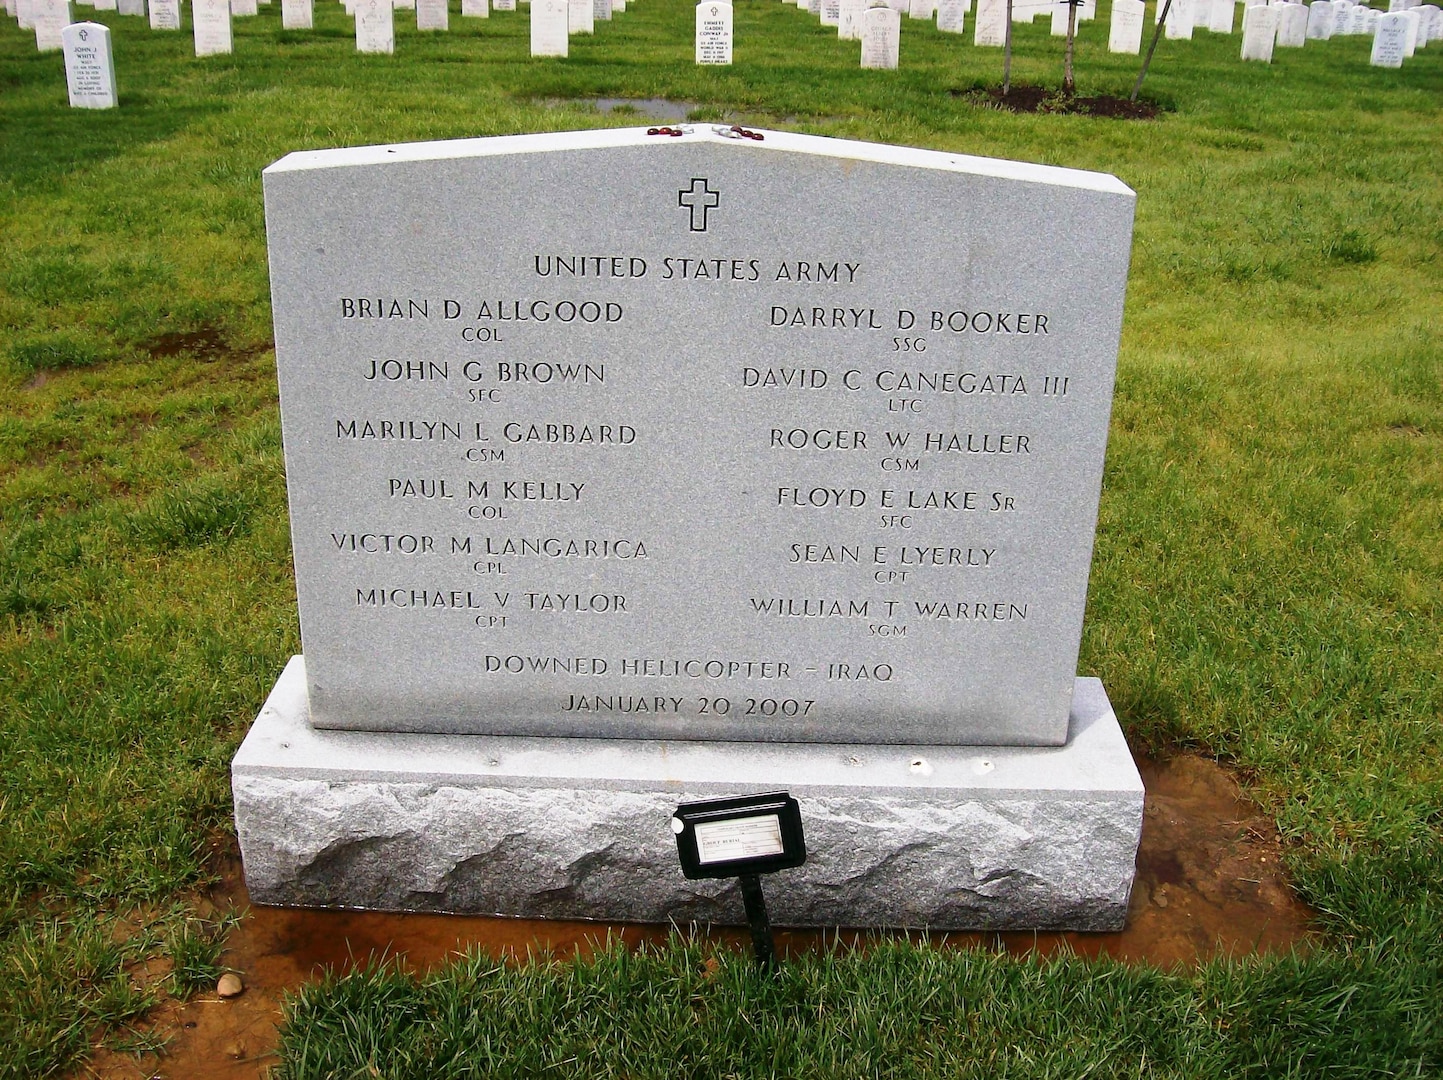 A mass grave marker at Arlington National Cemetery honors the 12 soldiers killed when their UH-60 Black Hawk helicopter was shot down near Baghdad on Jan. 20, 2007.